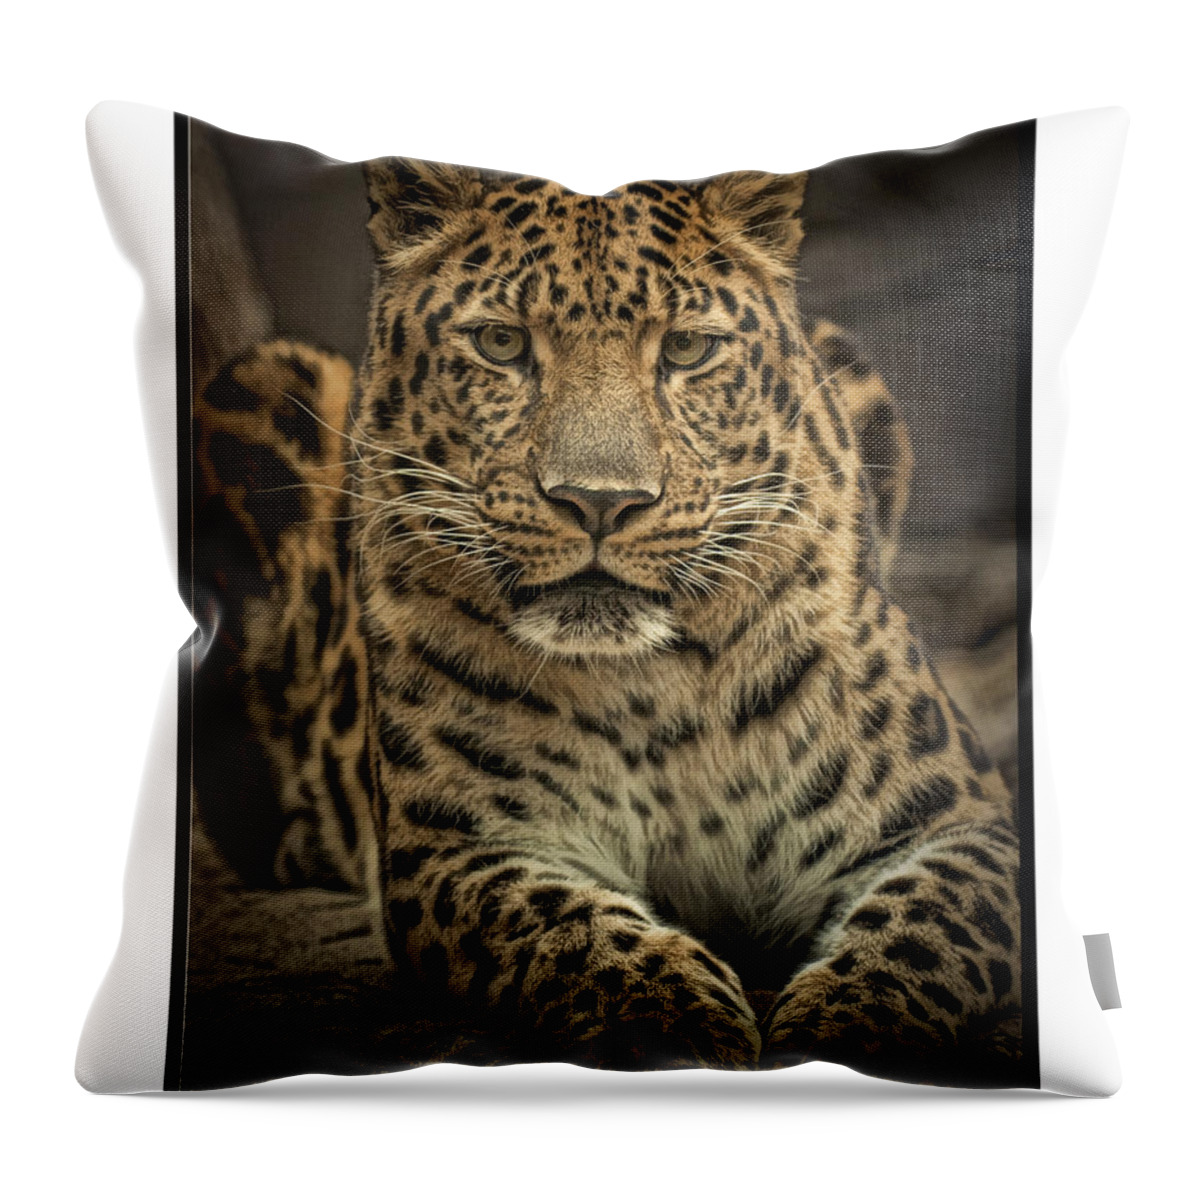 Krepkey Was His Name At The Philadelphia Zoo Throw Pillow featuring the photograph Poser by Cheri McEachin